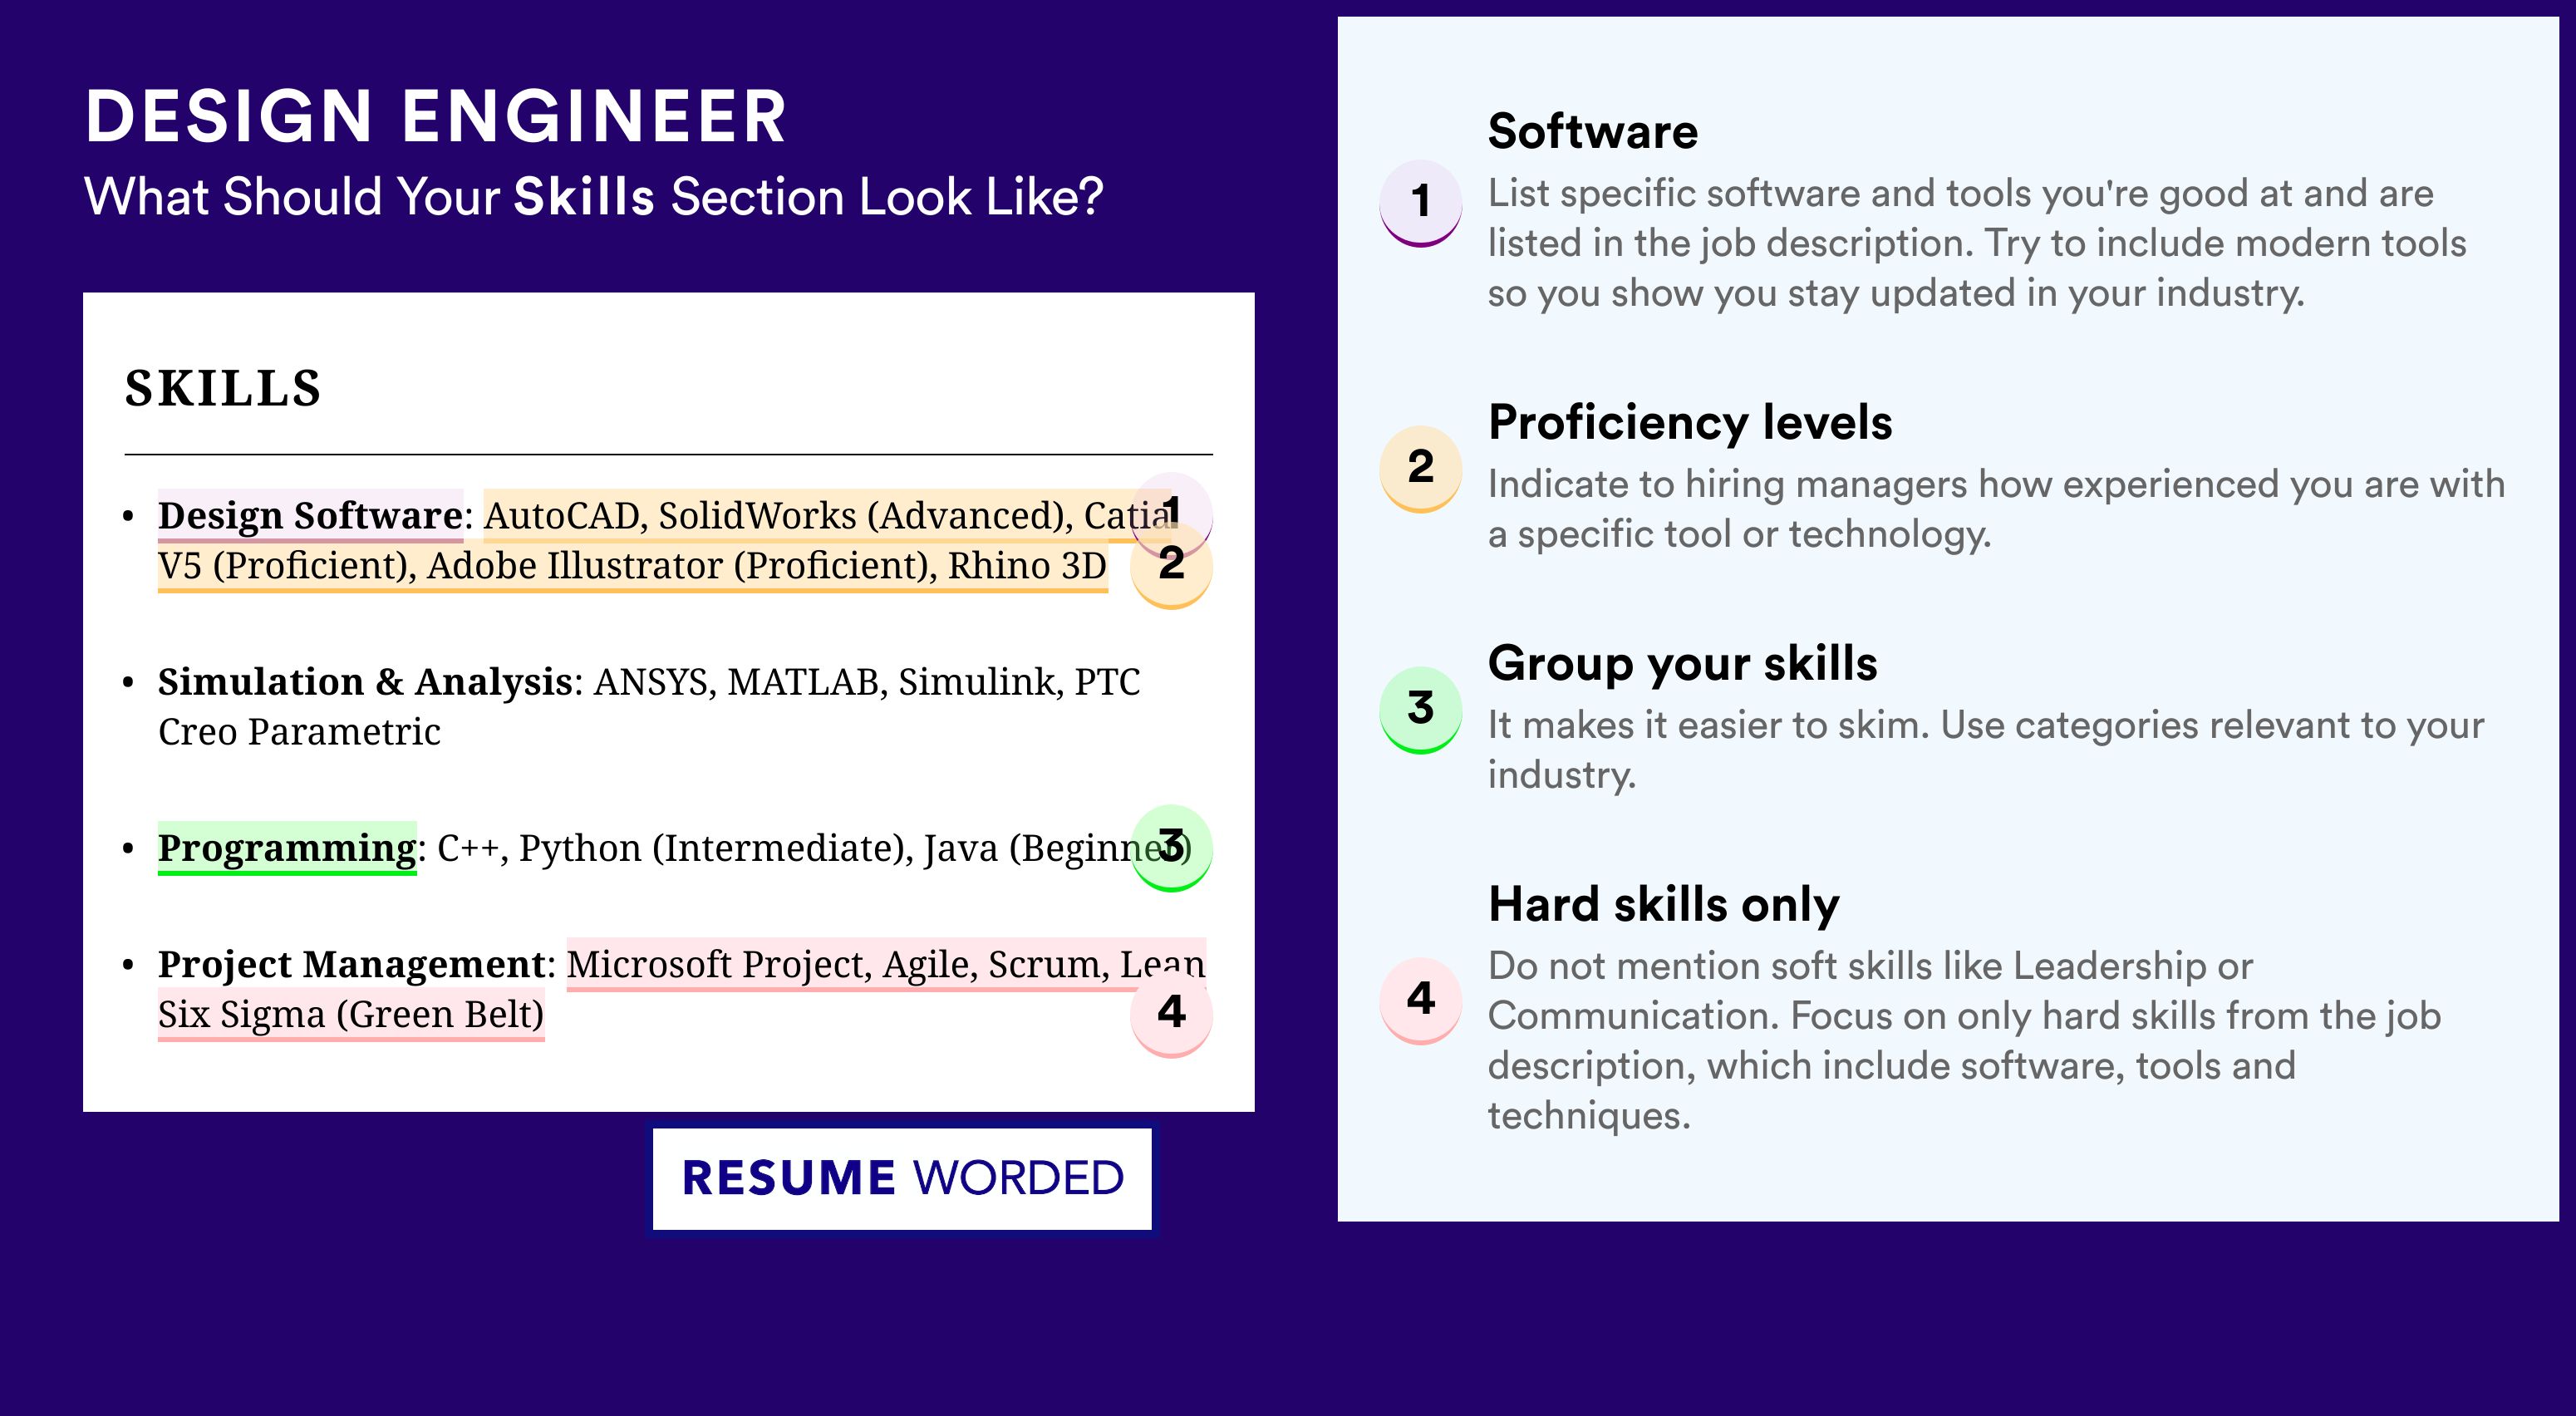 How To Write Your Skills Section - Design Engineer Roles